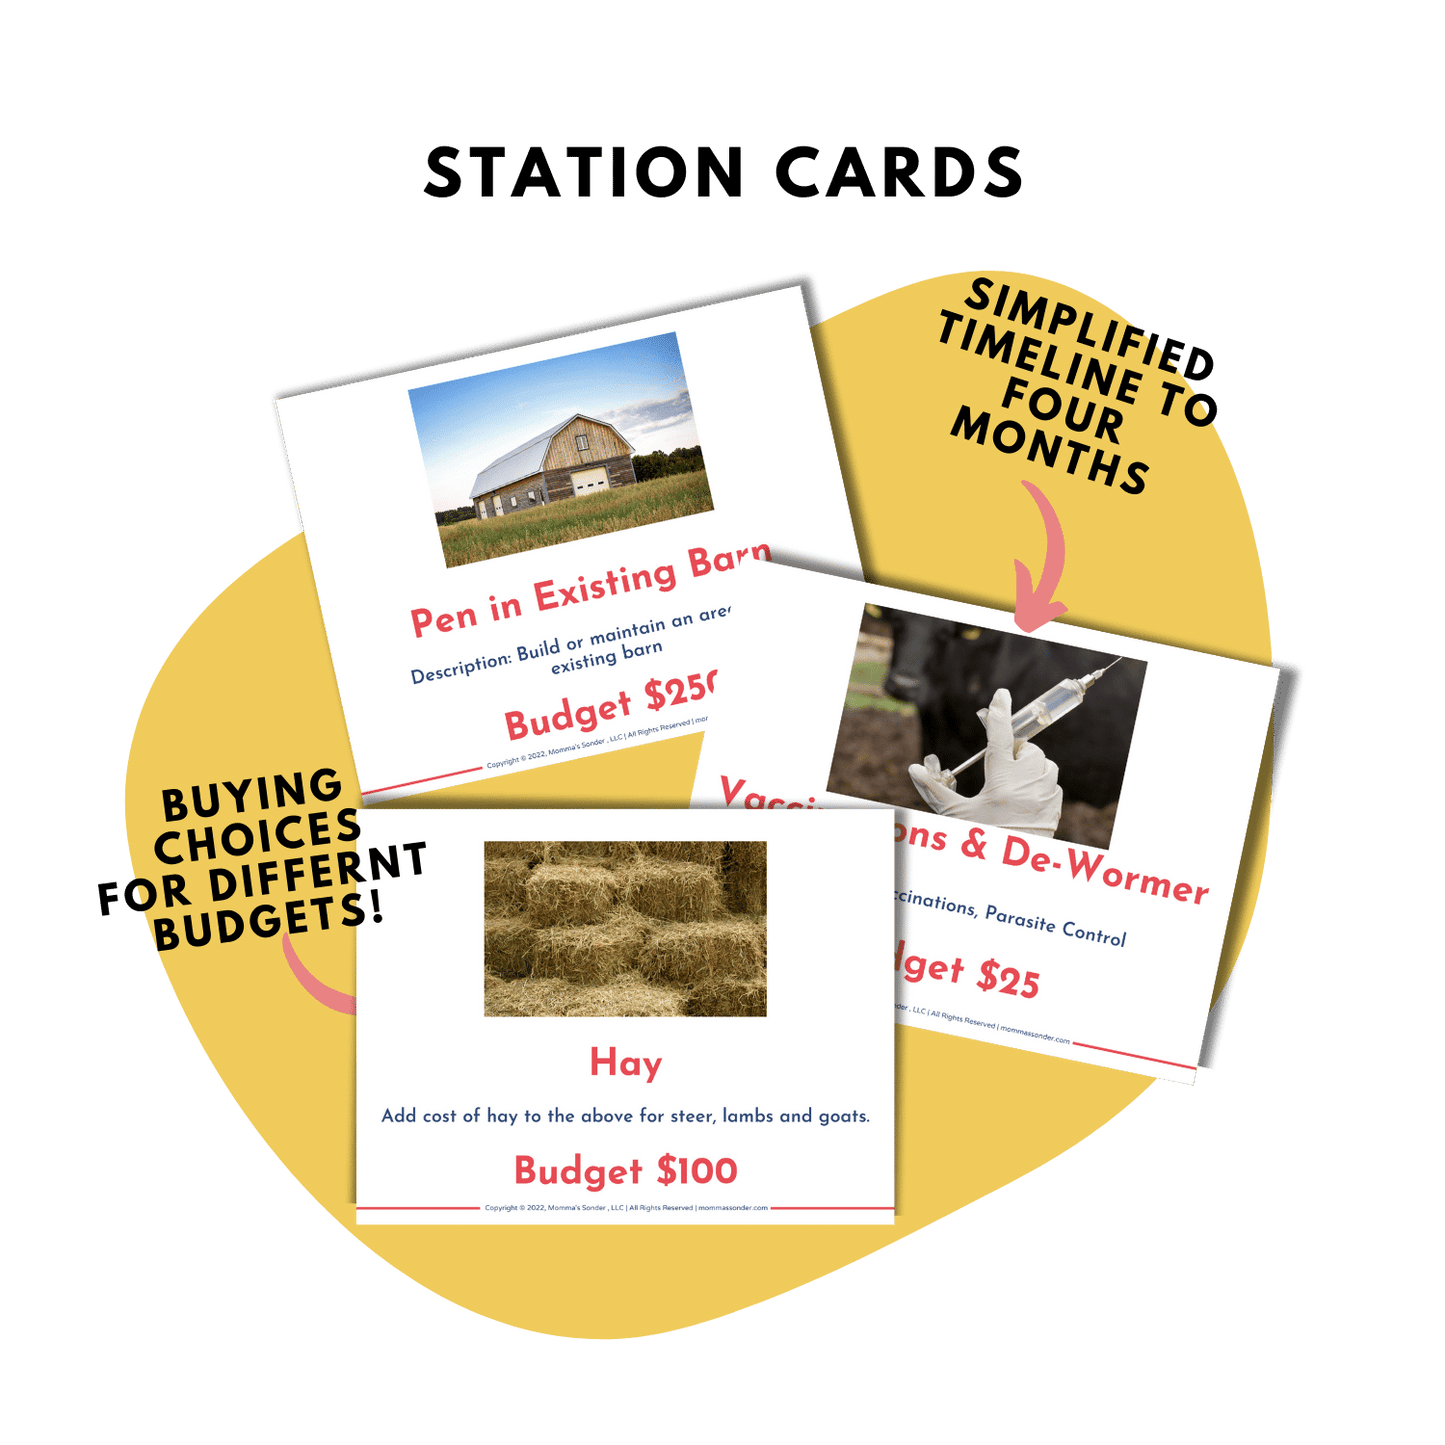 budget station cards from livestock record keeping lesson plan 